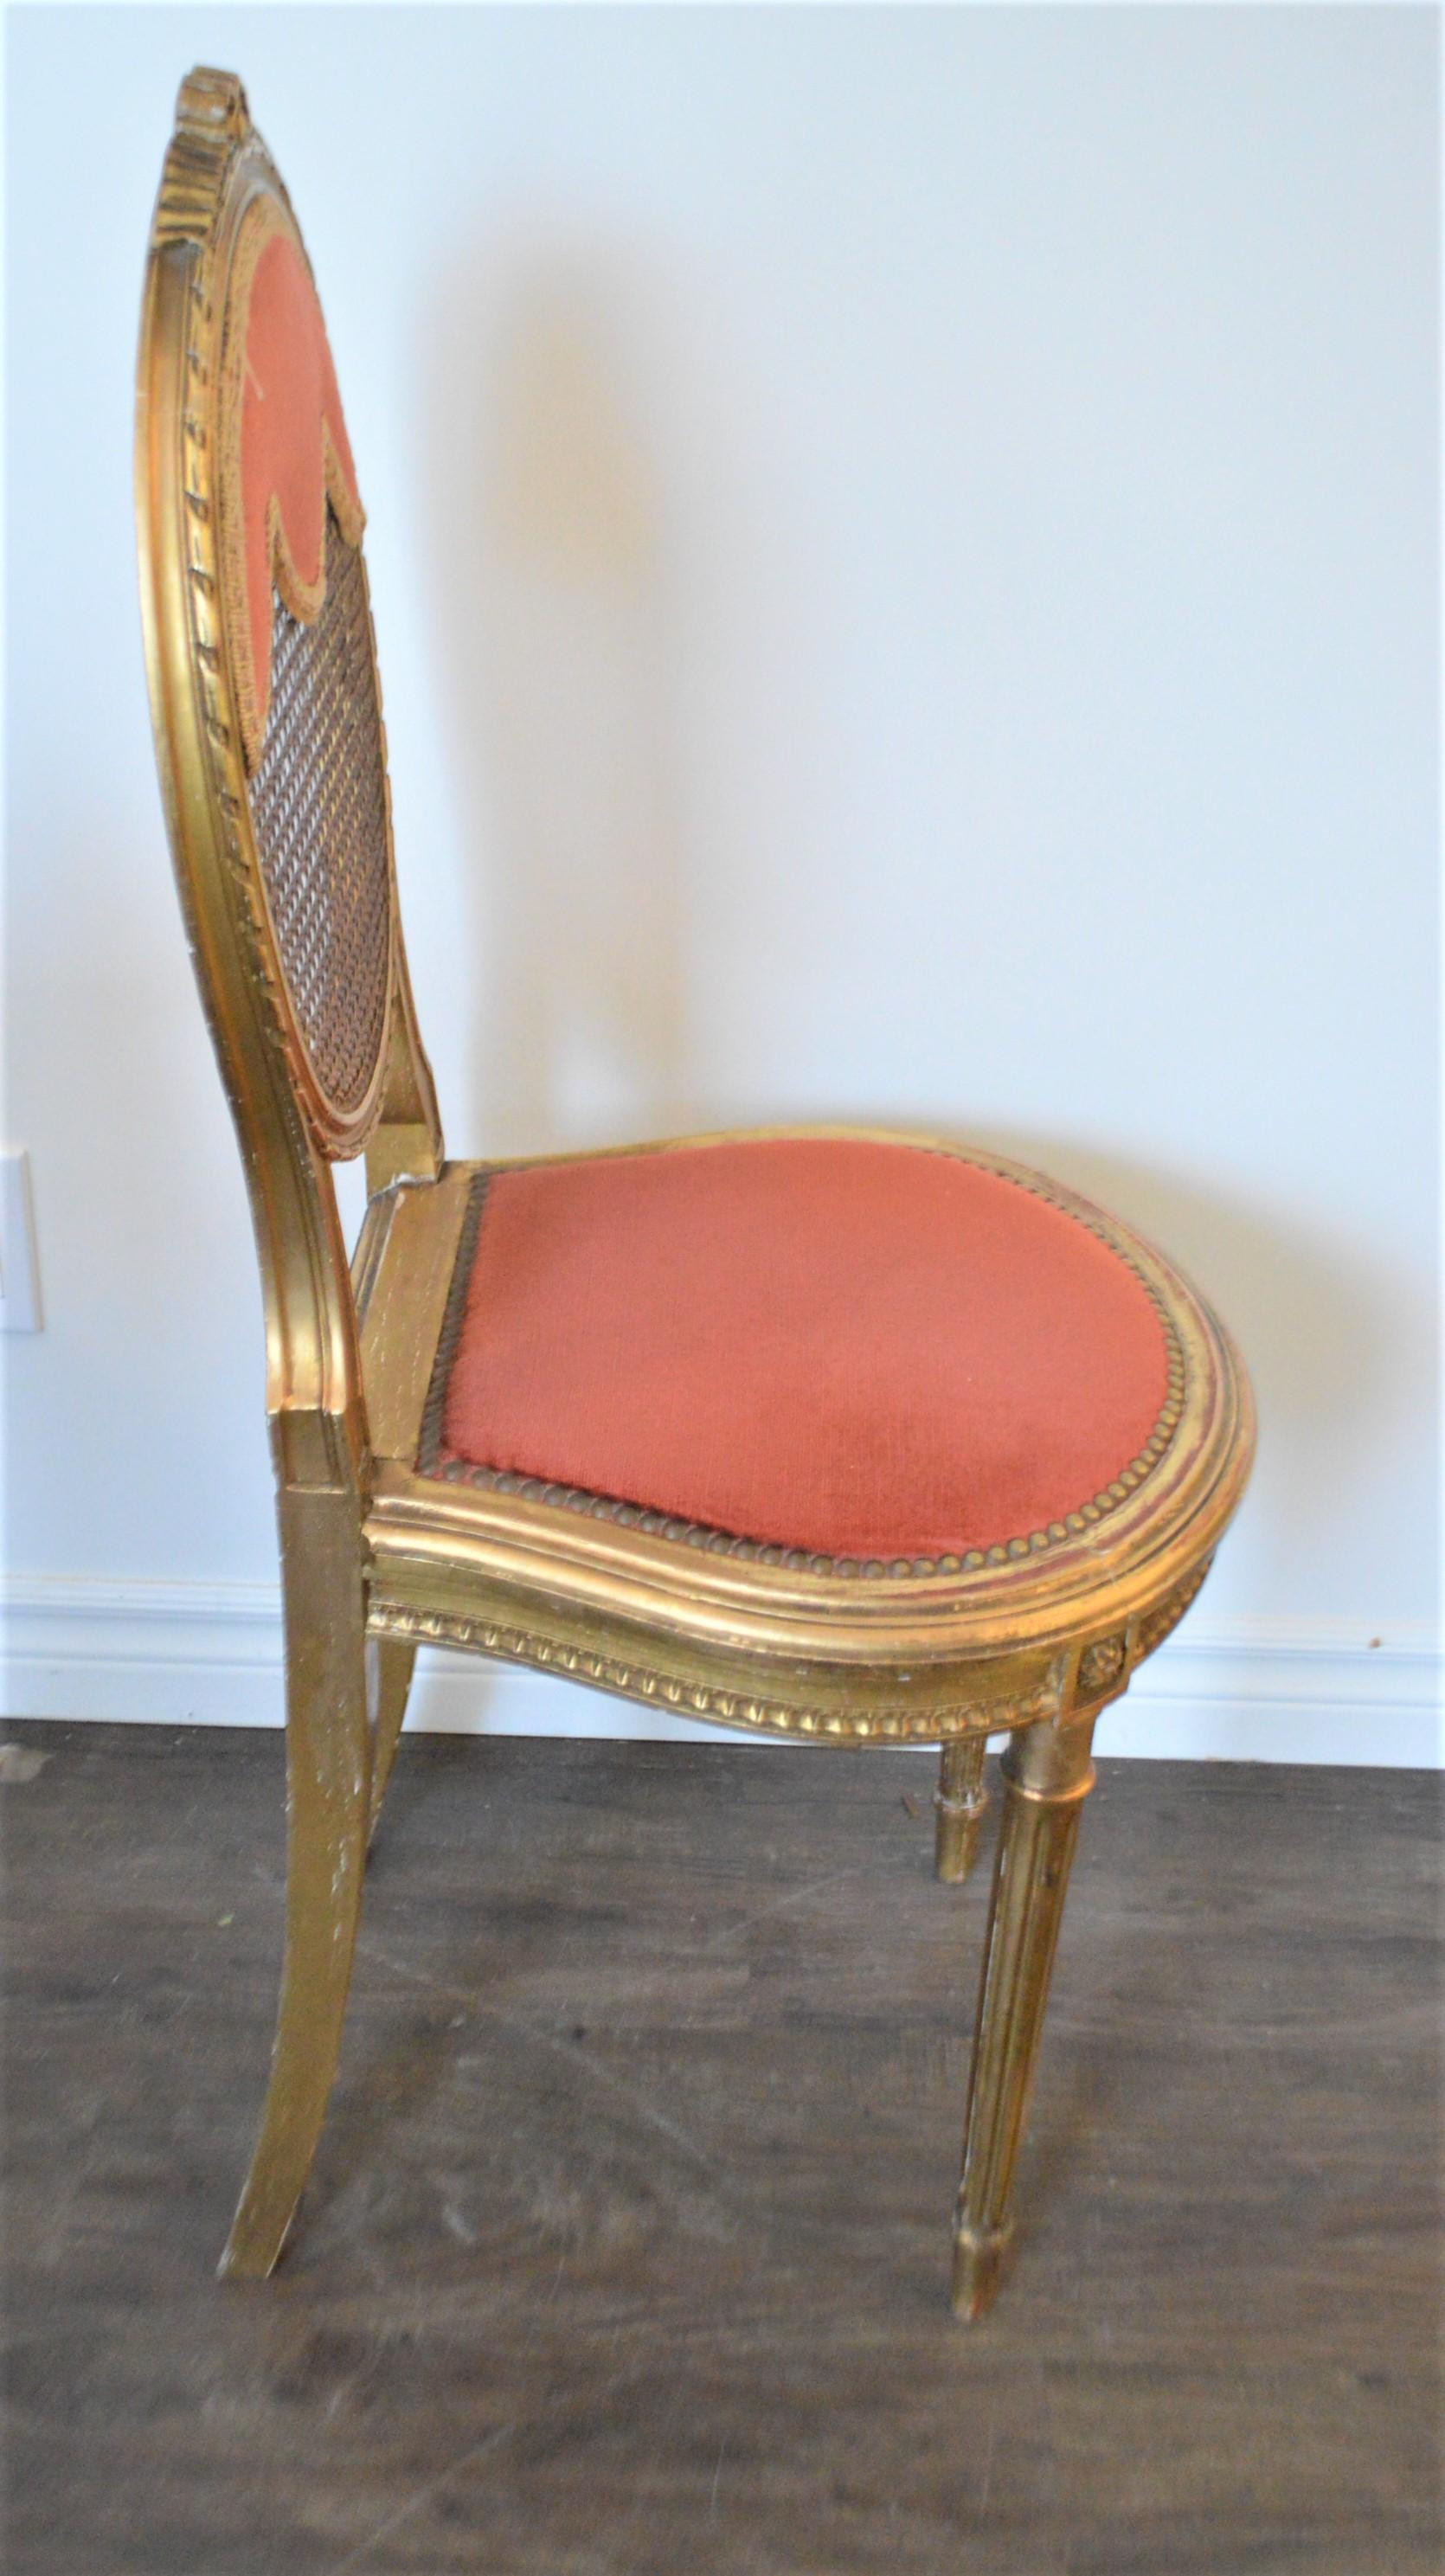 20th Century Louis XVI Style Gilded Accent Chair, Caned Back, Original Apricot Velvet Seat For Sale